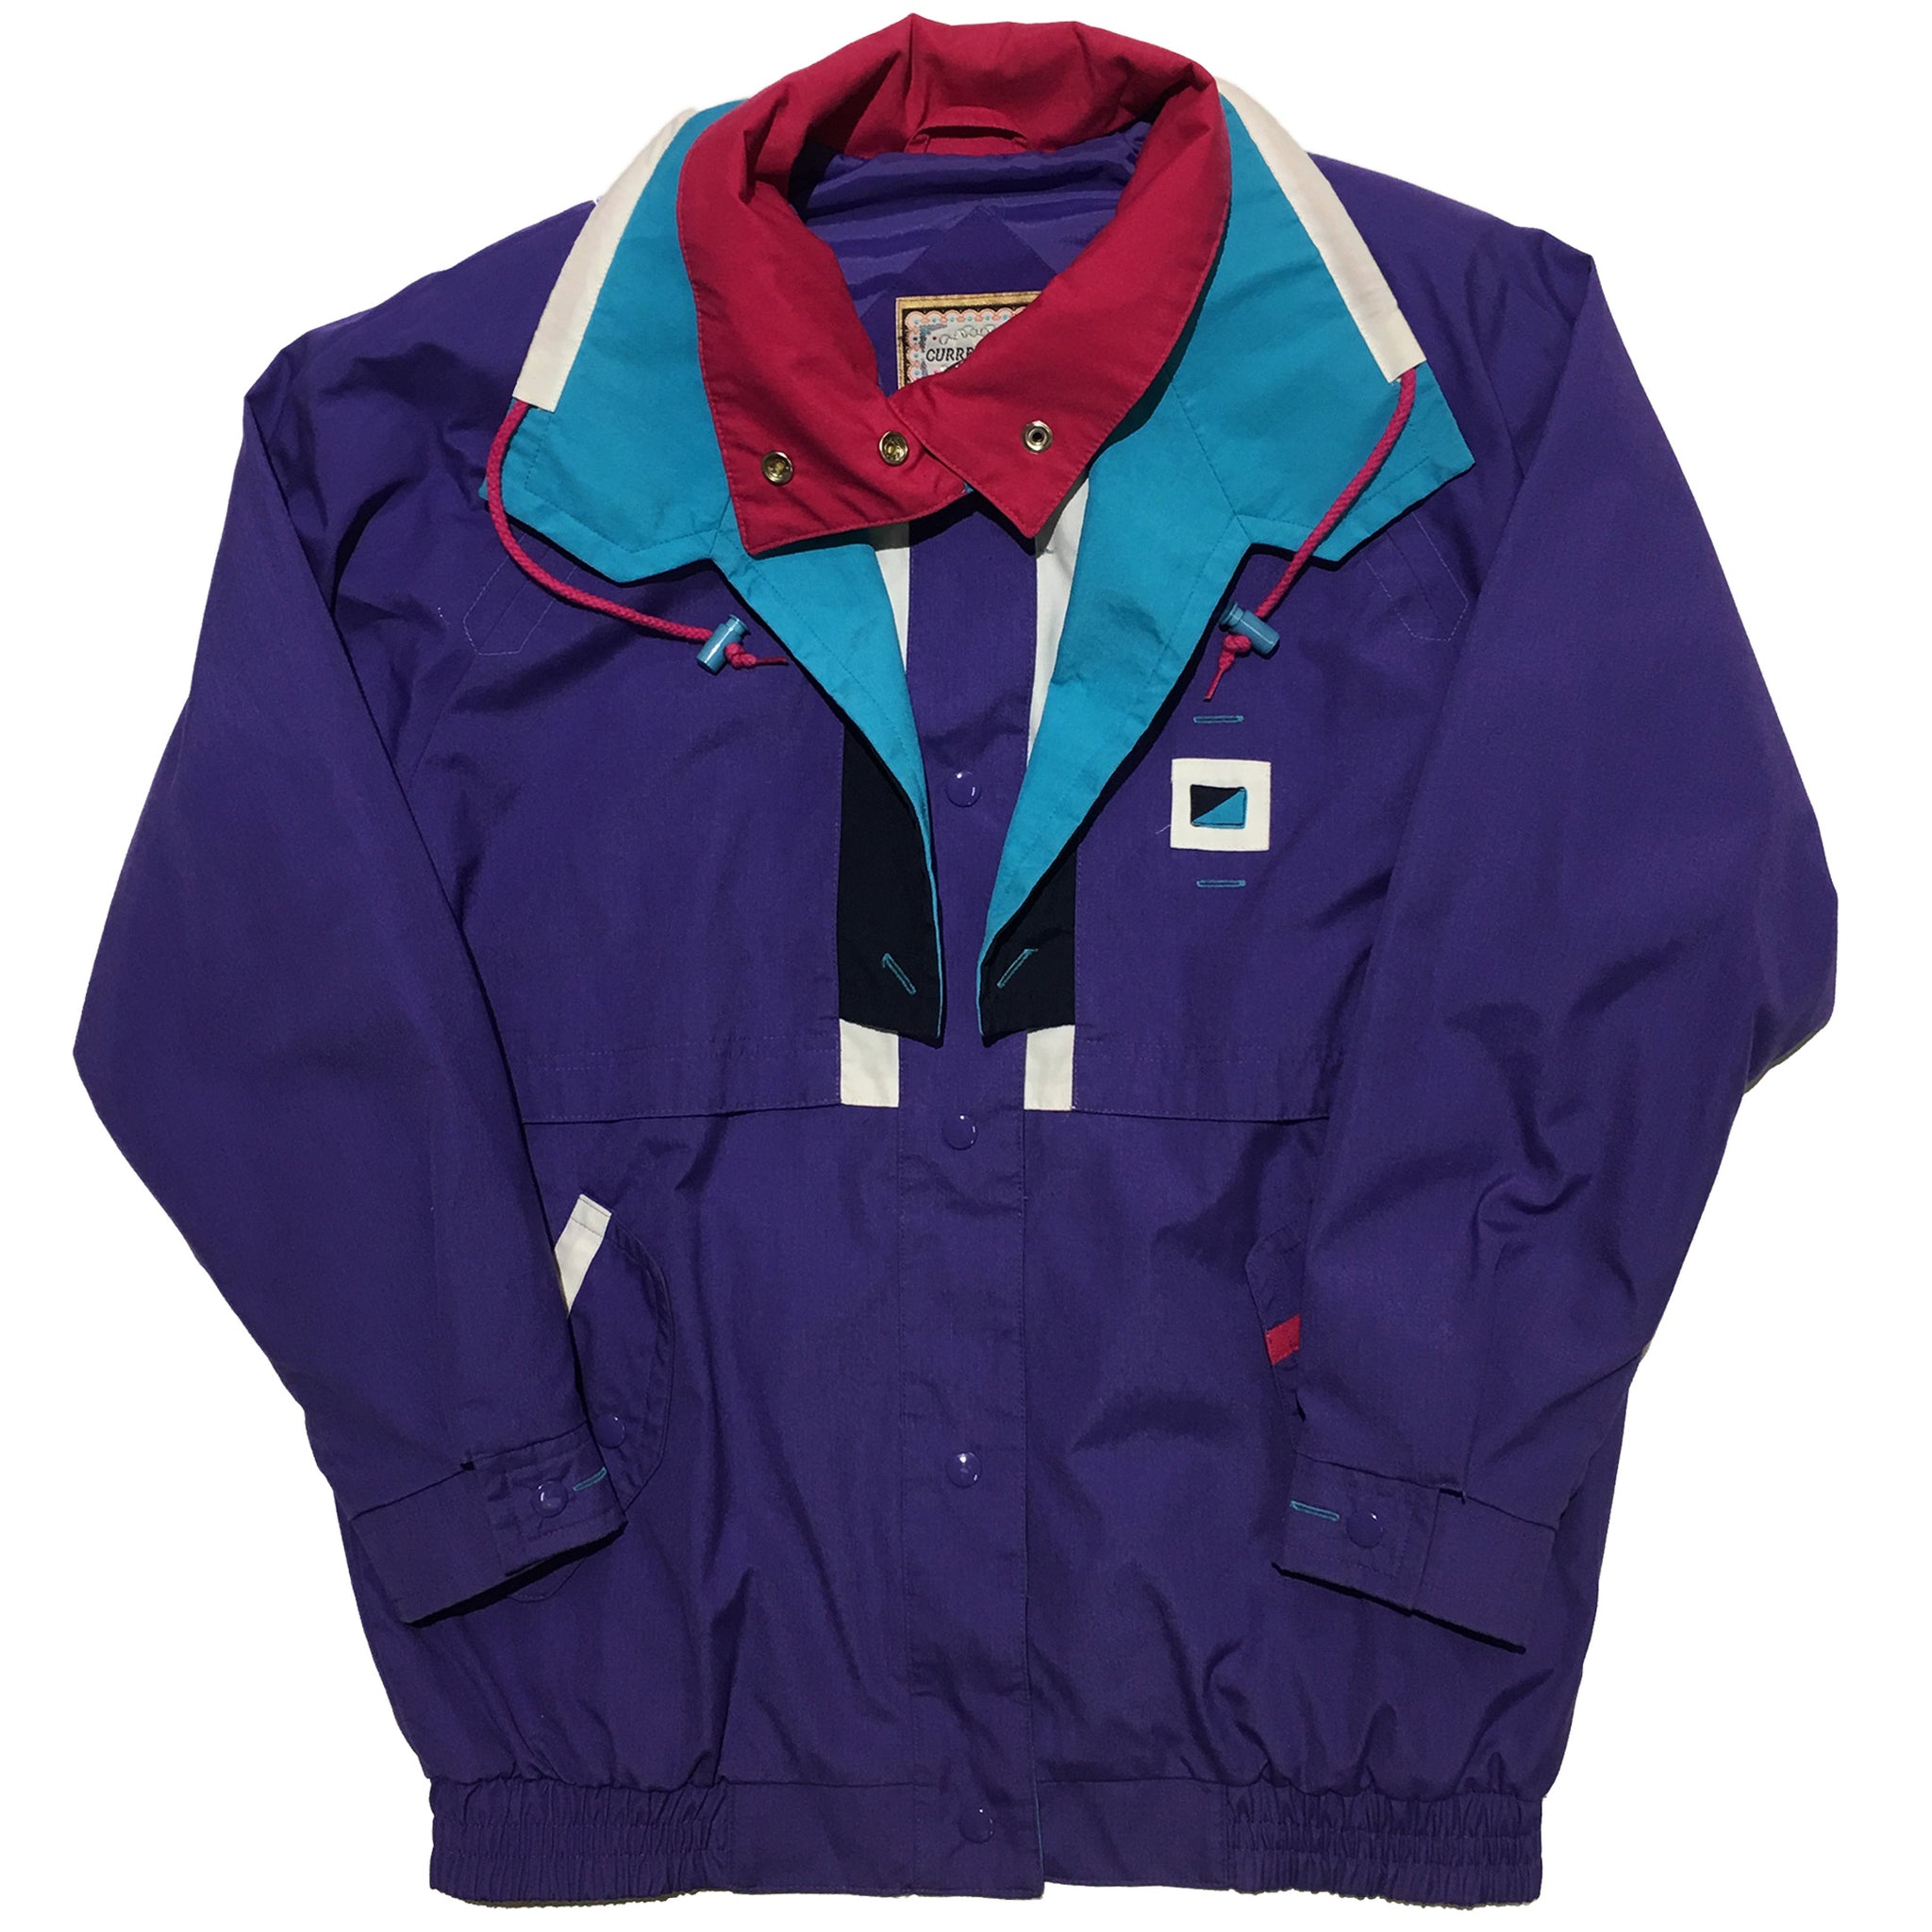 Current Seen Purple Cyan and Red Jacket